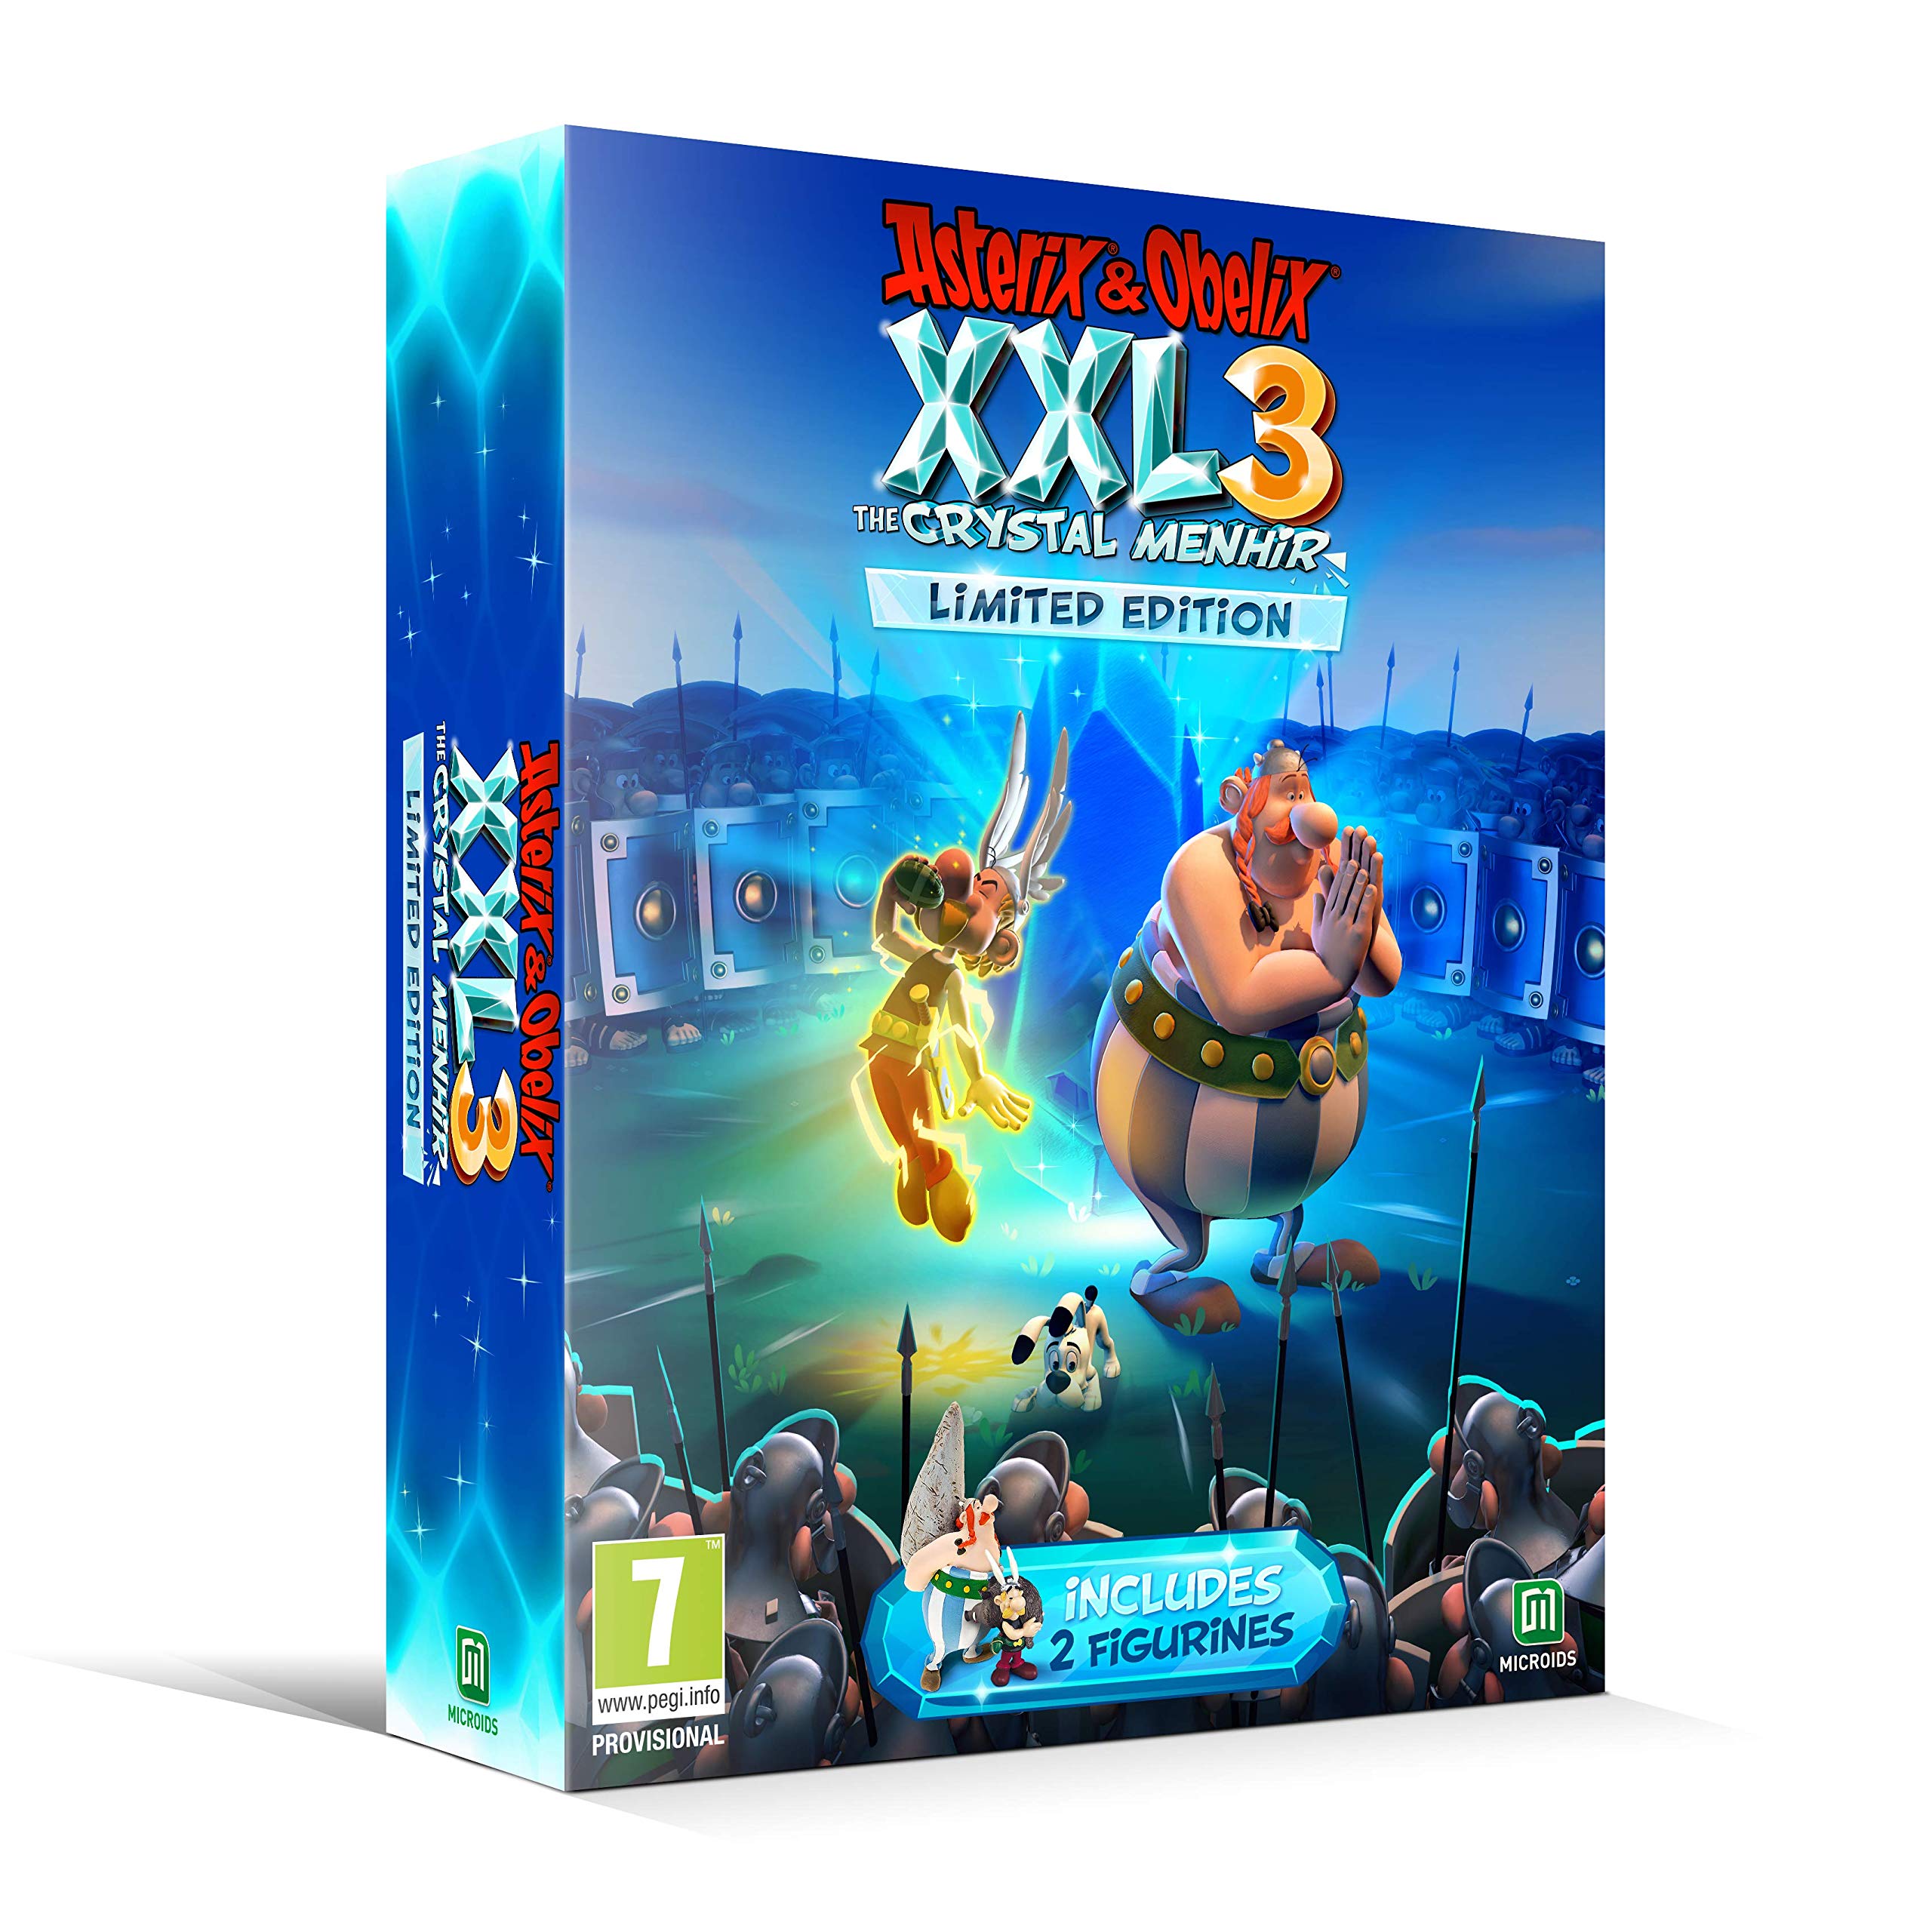 Asterix & Obelix XXL 3 The Crystal Menhir Limited Edition